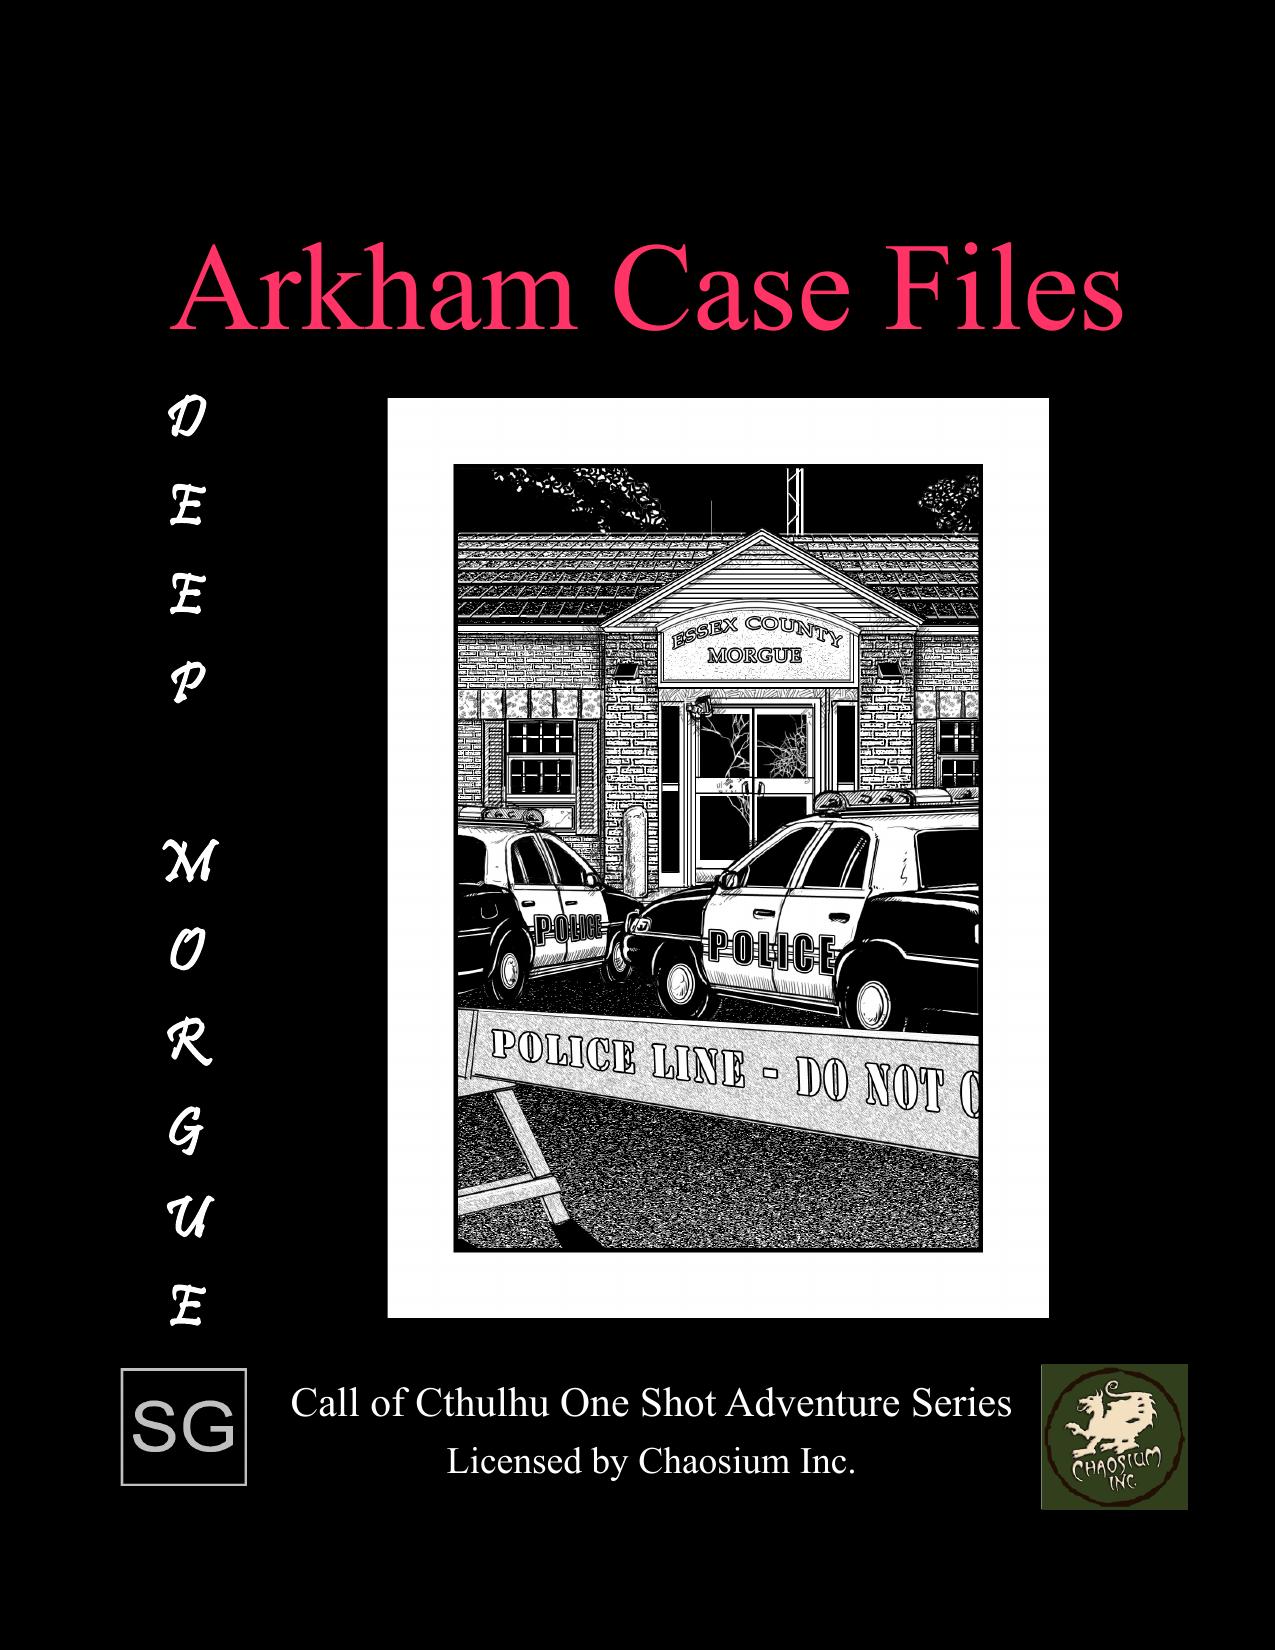 Call of Cthulhu - Arkham Case Files